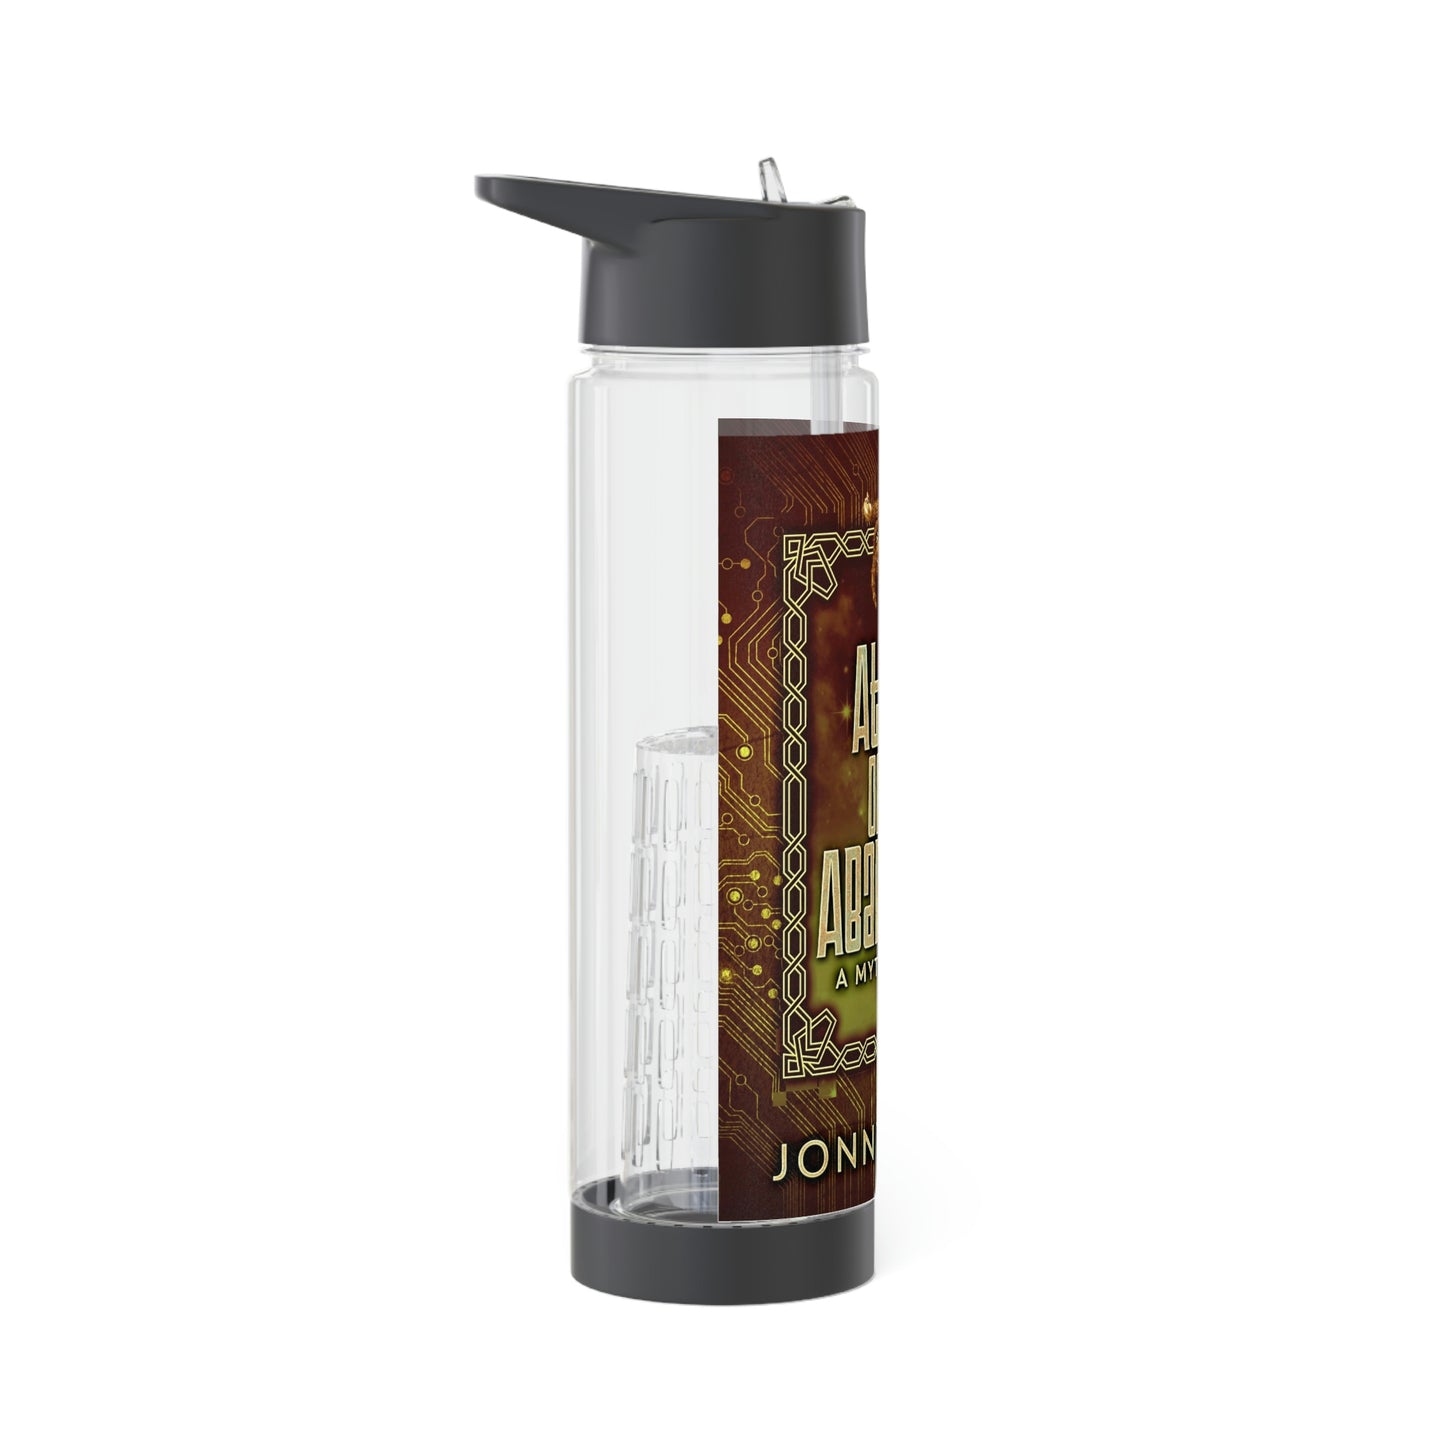 Athena - Of The Abandoned - Infuser Water Bottle